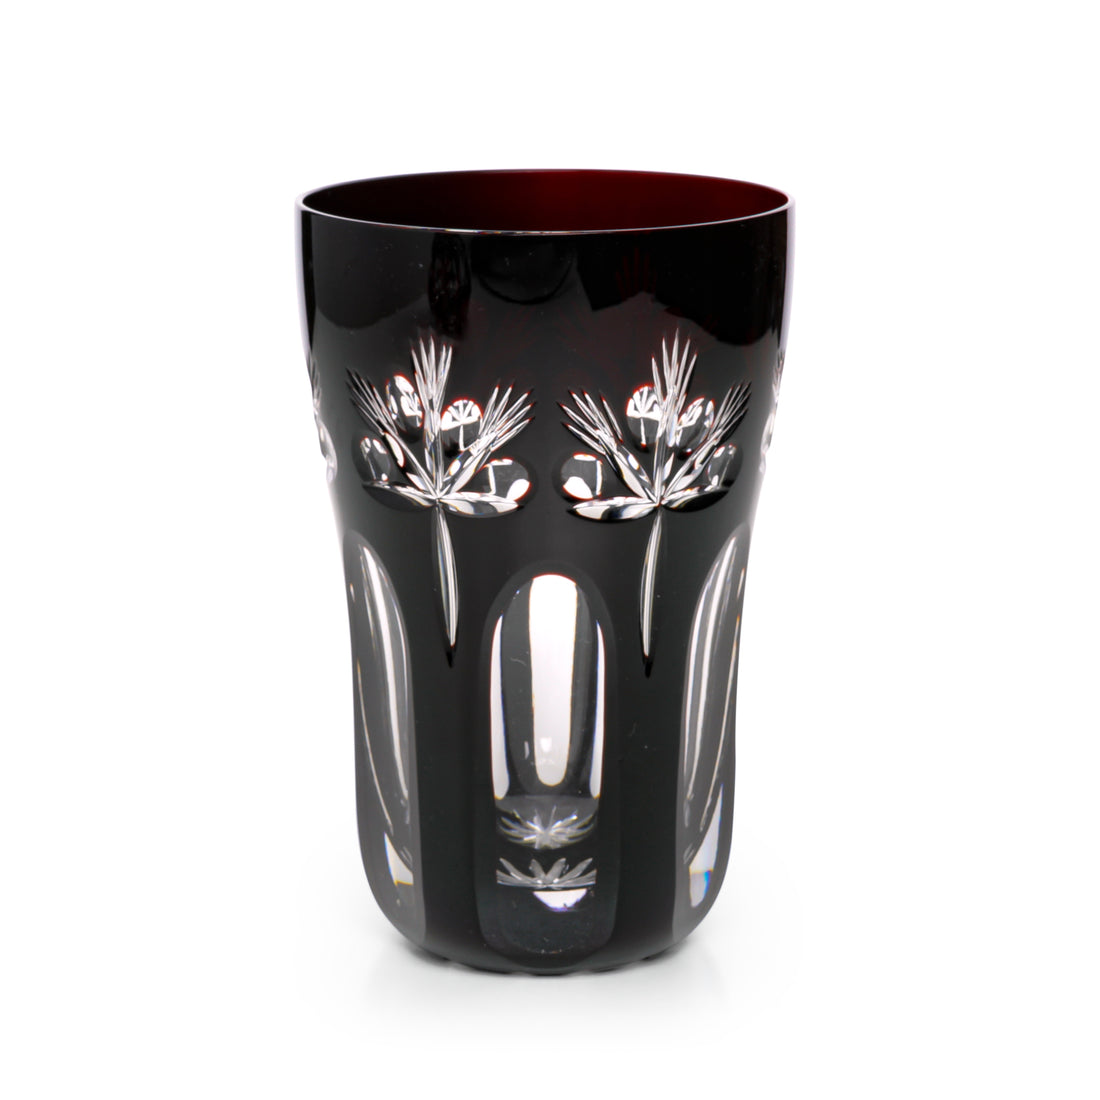 Crystal Cased Black/Red Cut To Clear Pitcher & Tumblers